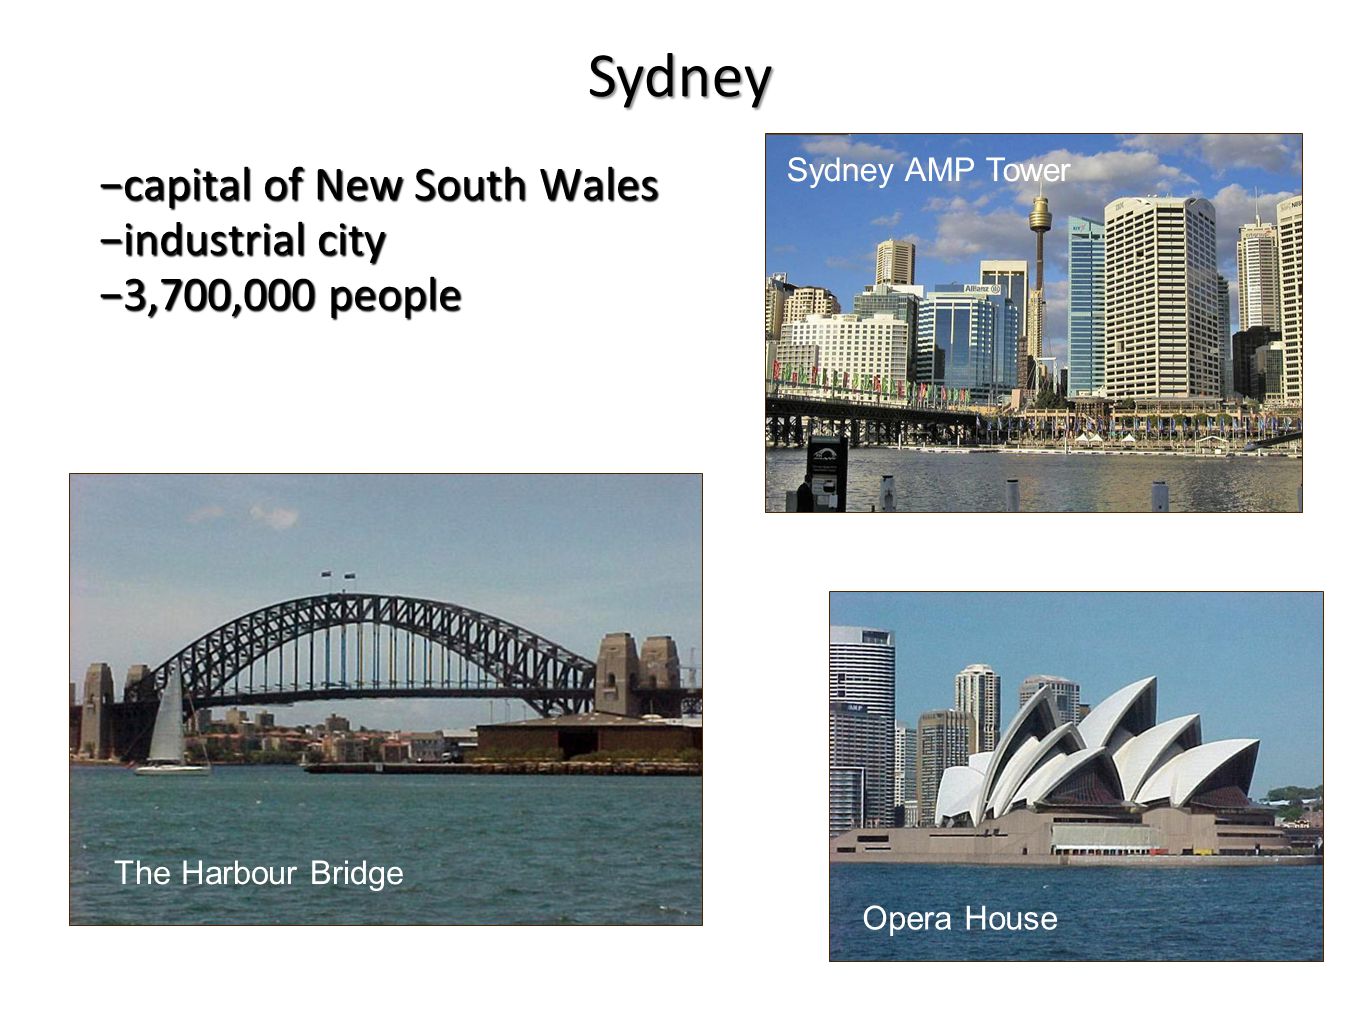 −capital of New South Wales −industrial city −3,700,000 people The Harbour Bridge Sydney AMP Tower Opera House Sydney